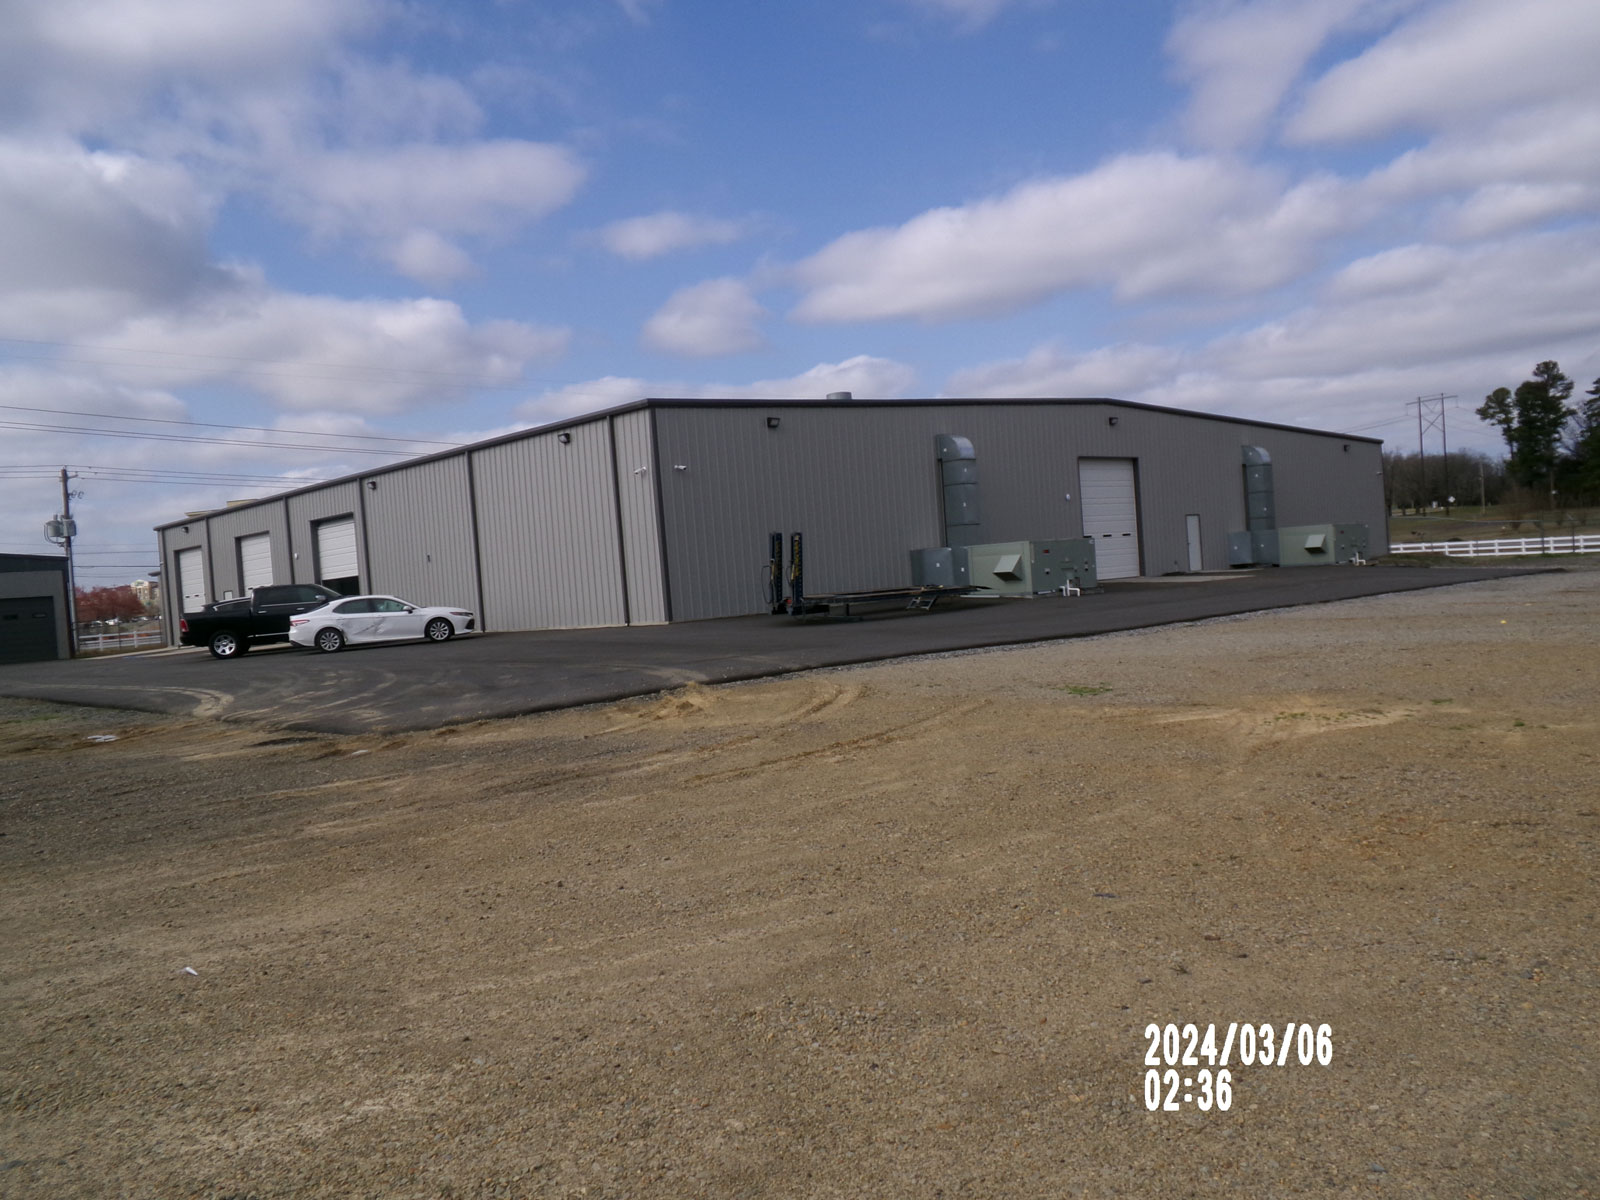 Commercial warehouse storage facility140’x100’x20’’
Red iron frame
26 gauge roof
26 gauge walls
Gutters and downspouts

Boerne Texas approx  location
1-14’x14’ roll up door
6-18’x18’ roll up doors
3” roof and wall insulation insulation
6-3070 steel walk doors